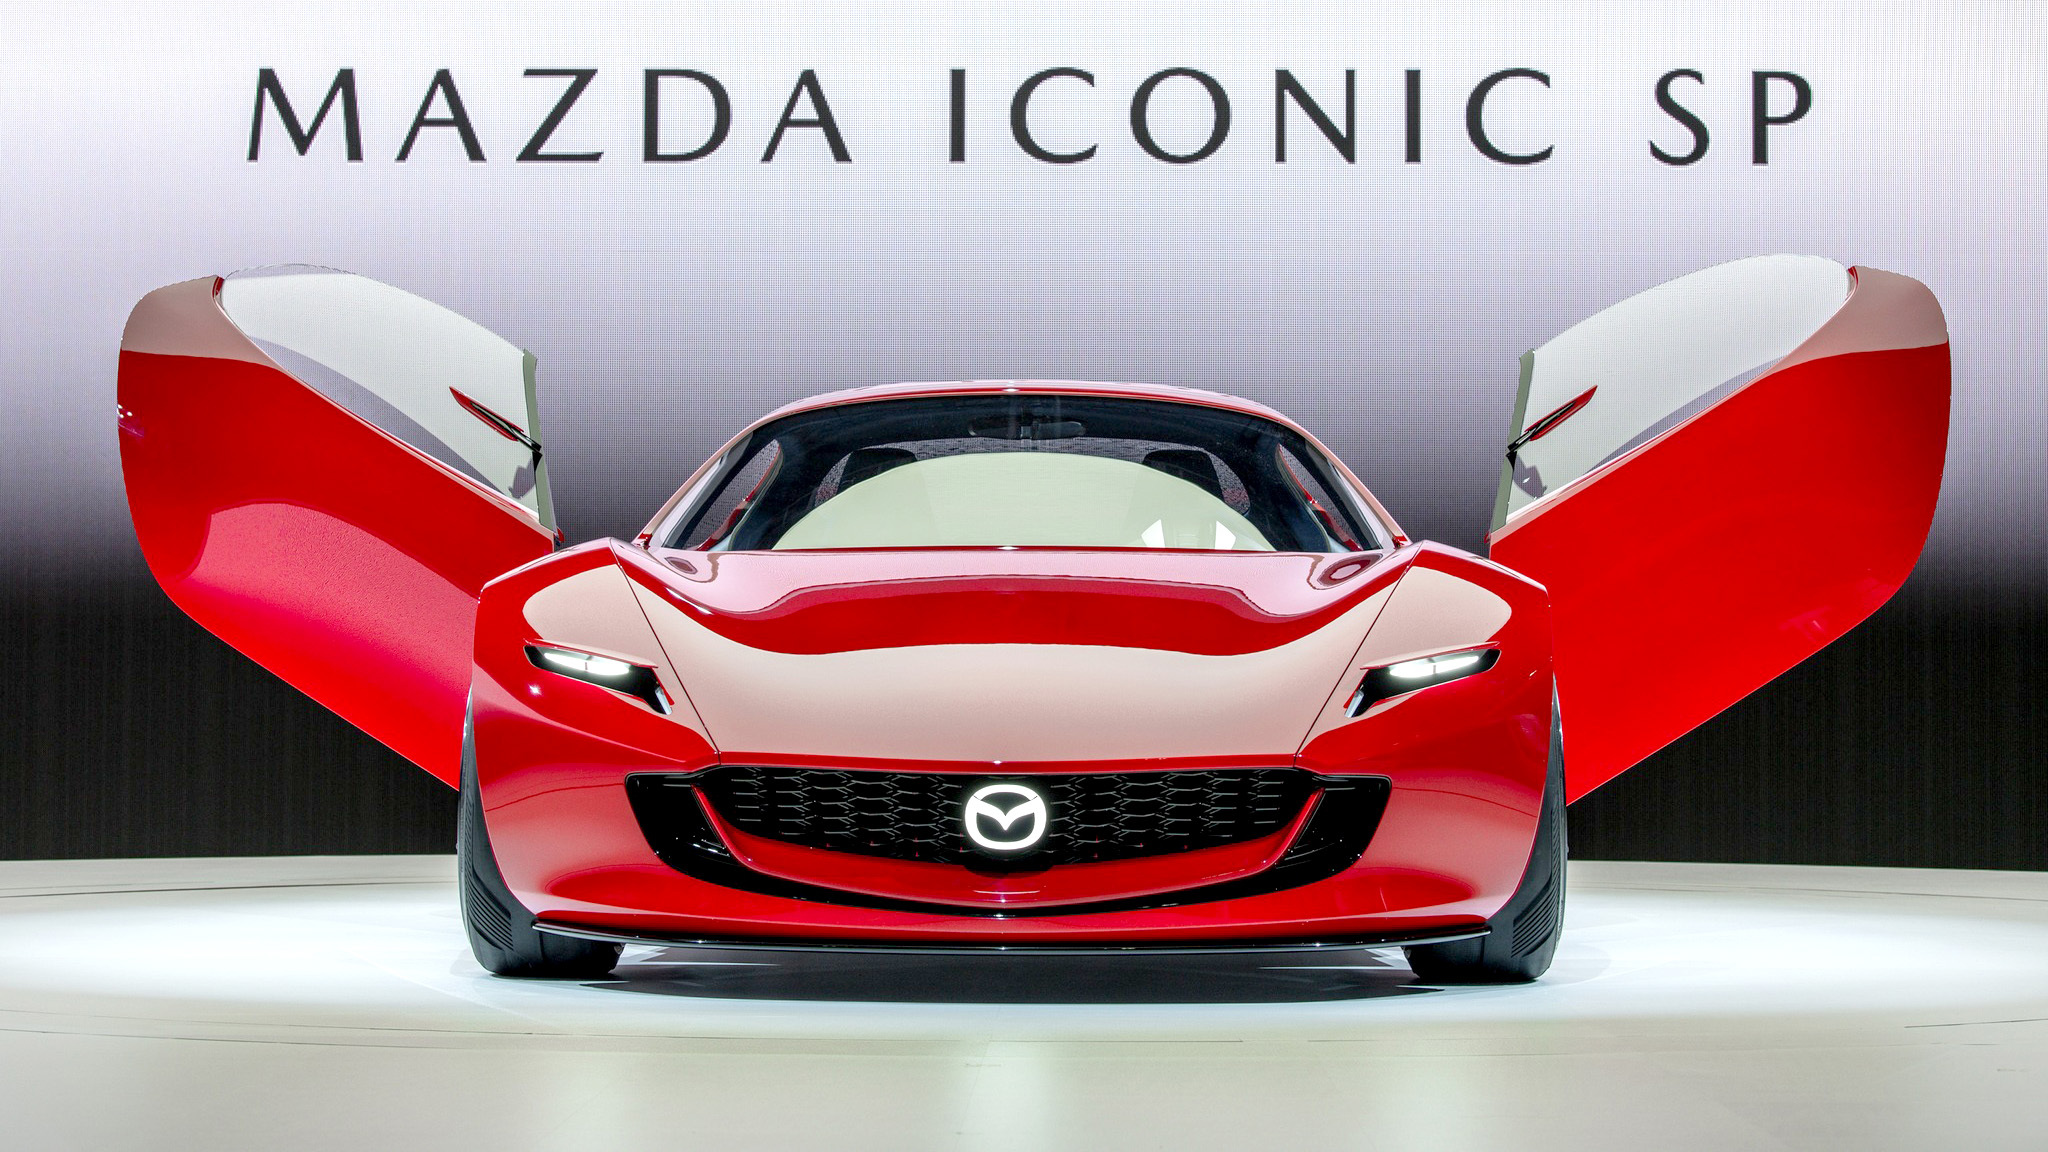 Mazda Iconic SP Concept is a Miata with an RX-7 Engine